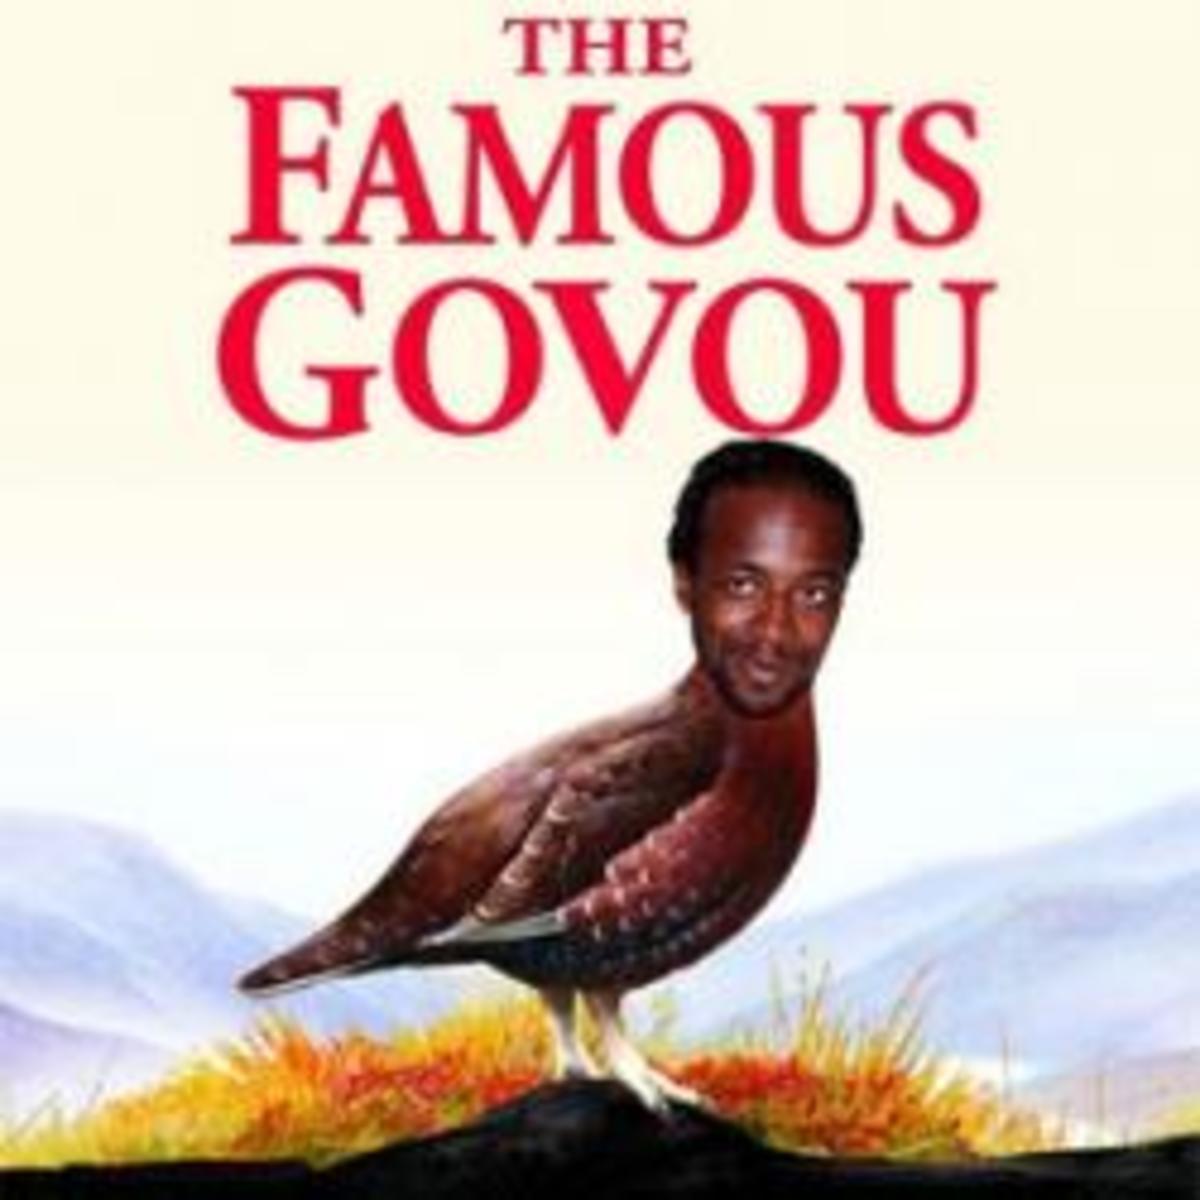 The famous Govou!